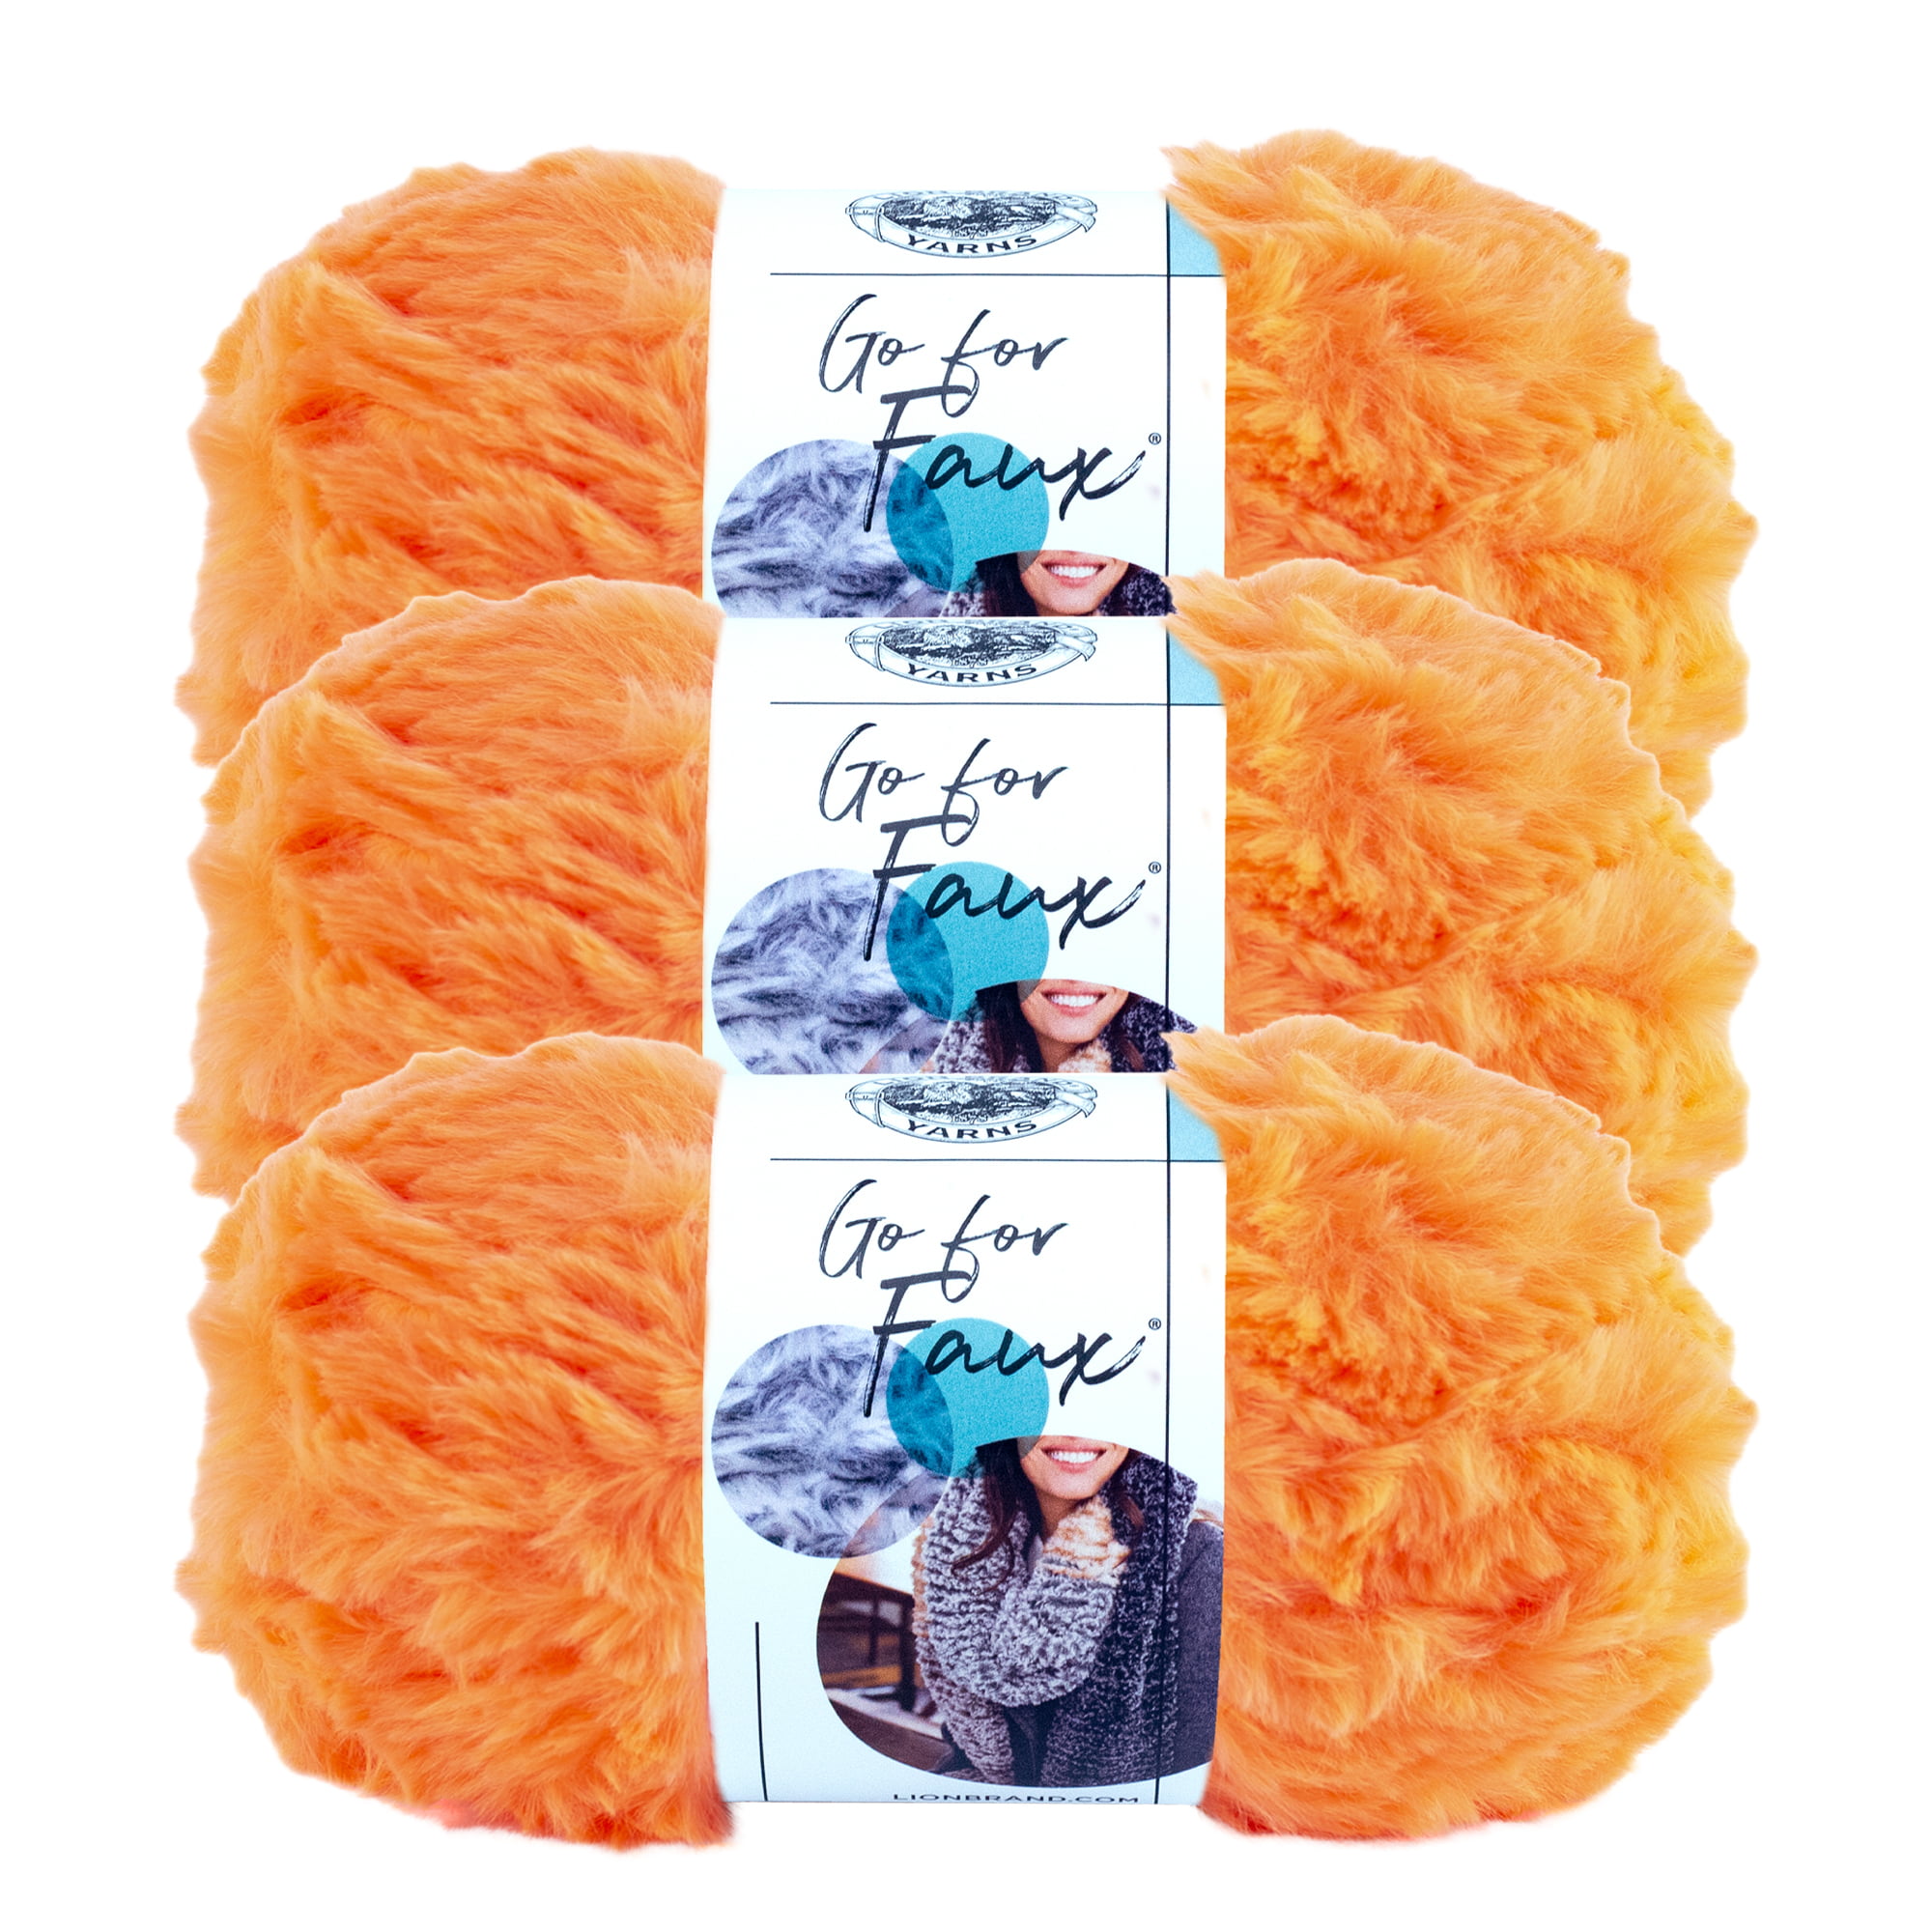 A2Z Yarn, LLC - Go For Faux by Lion Brand yarns - Bear, Husky, and Black  Panther colors are back in stock! Customers are making beautiful cowls from  these yarns!